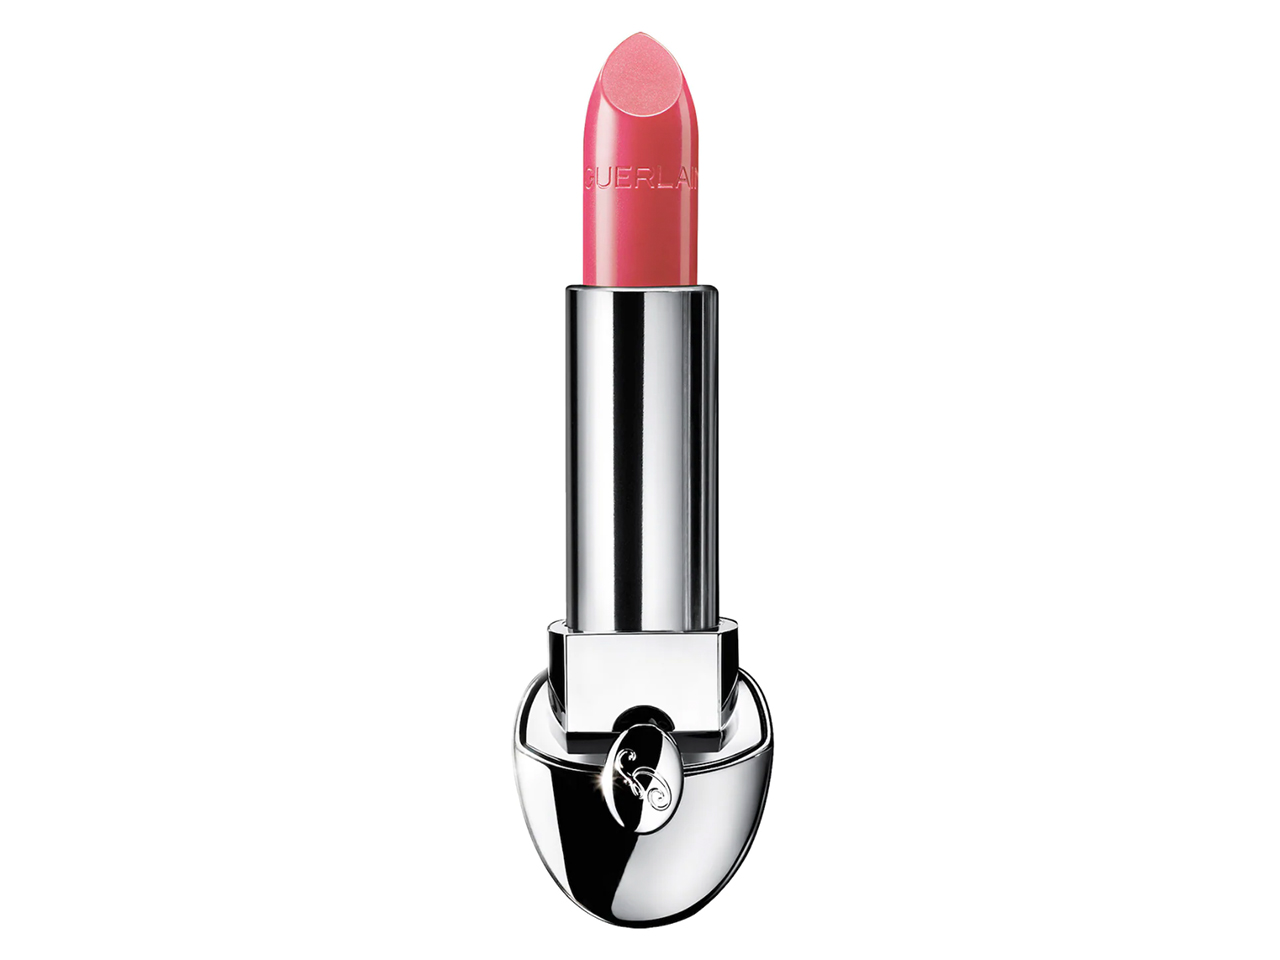 A refillable Guerlain lipstick for an article on the best refillable beauty products